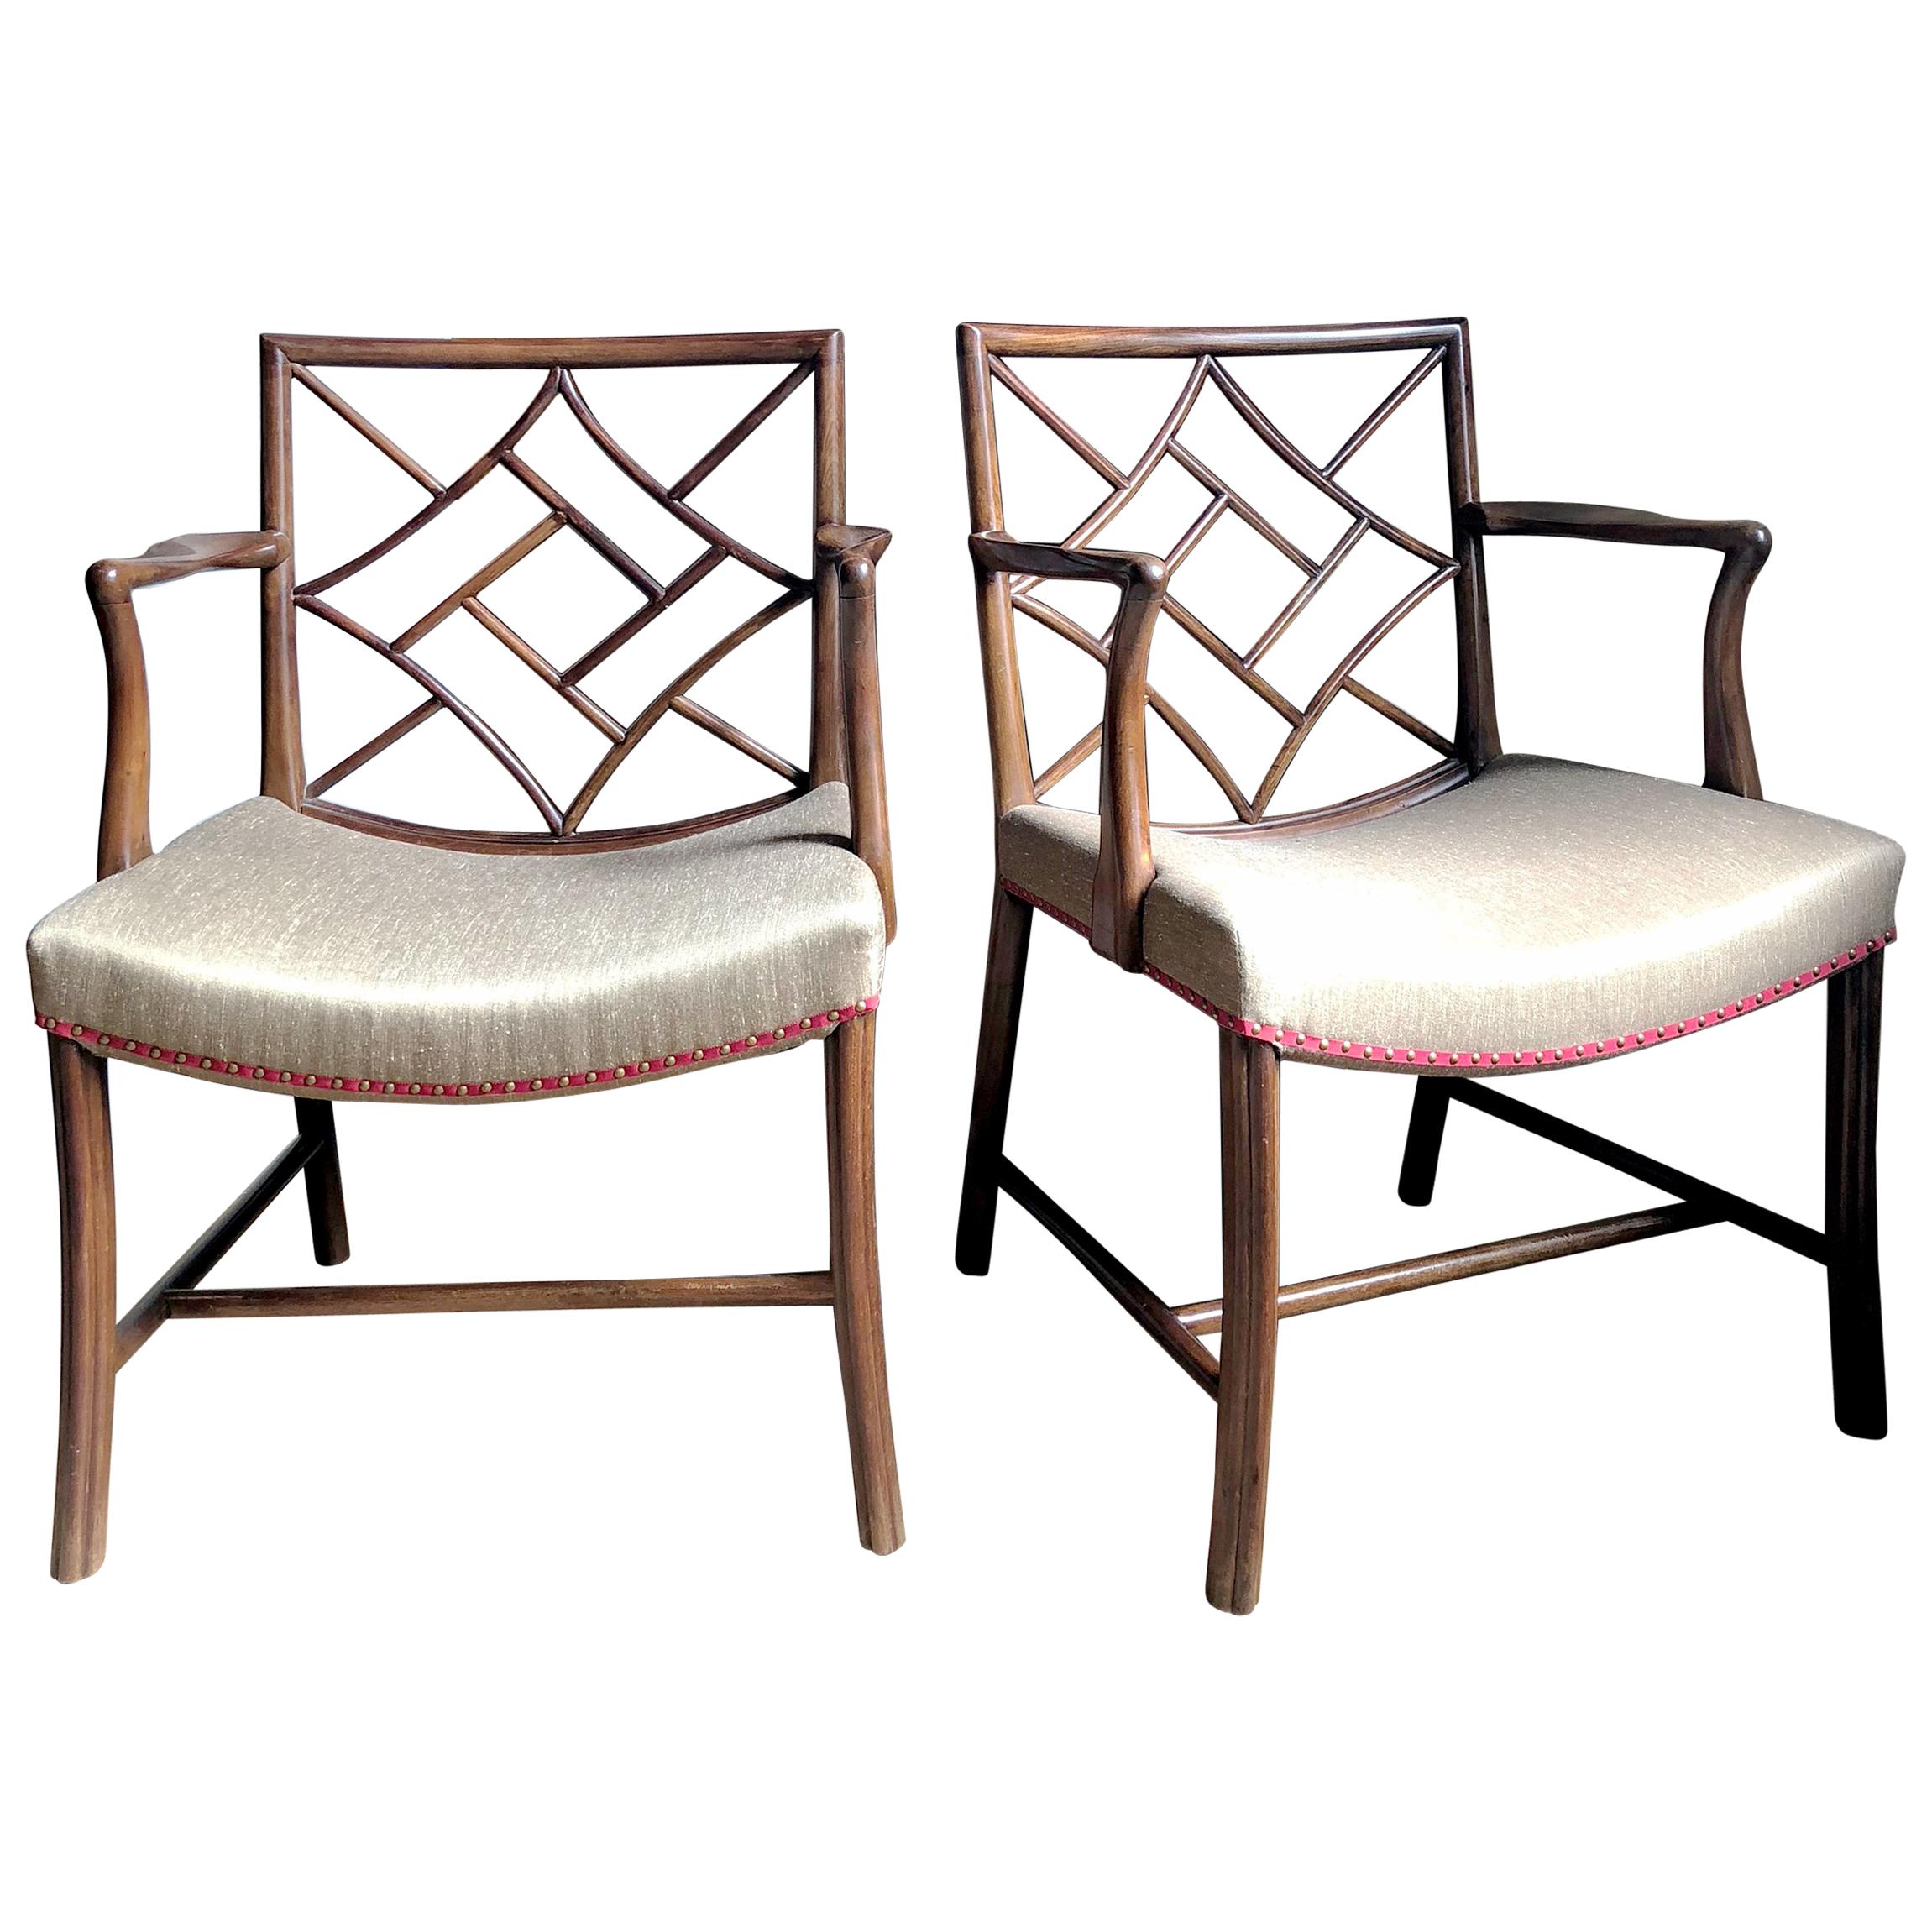 Pair of Chinese Chippendale Mahogany Lattice Back Armchairs